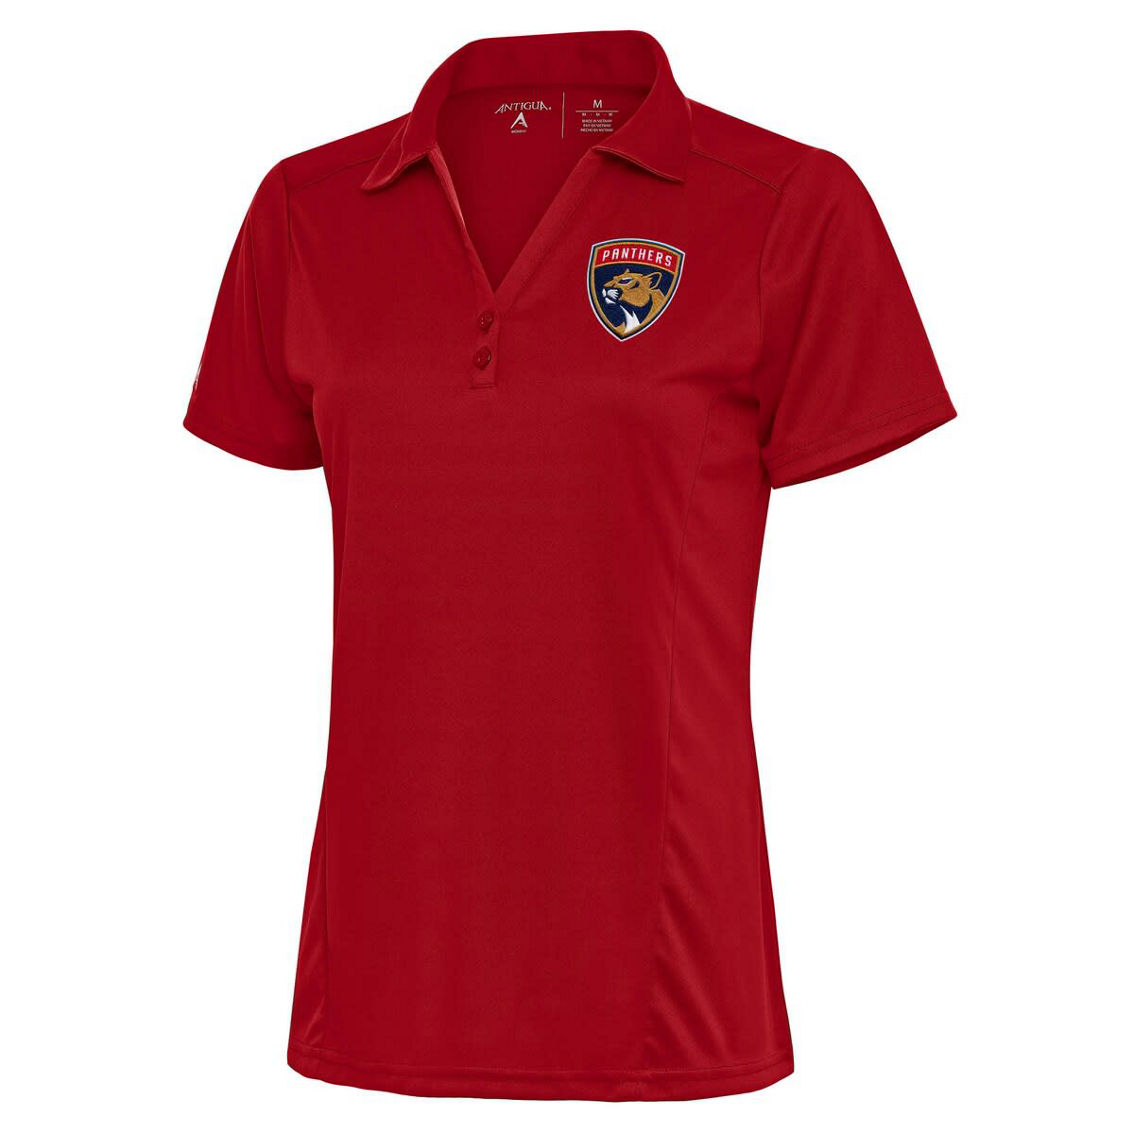 Antigua Women's Red Florida Panthers Team Logo Tribute Polo - Image 2 of 2